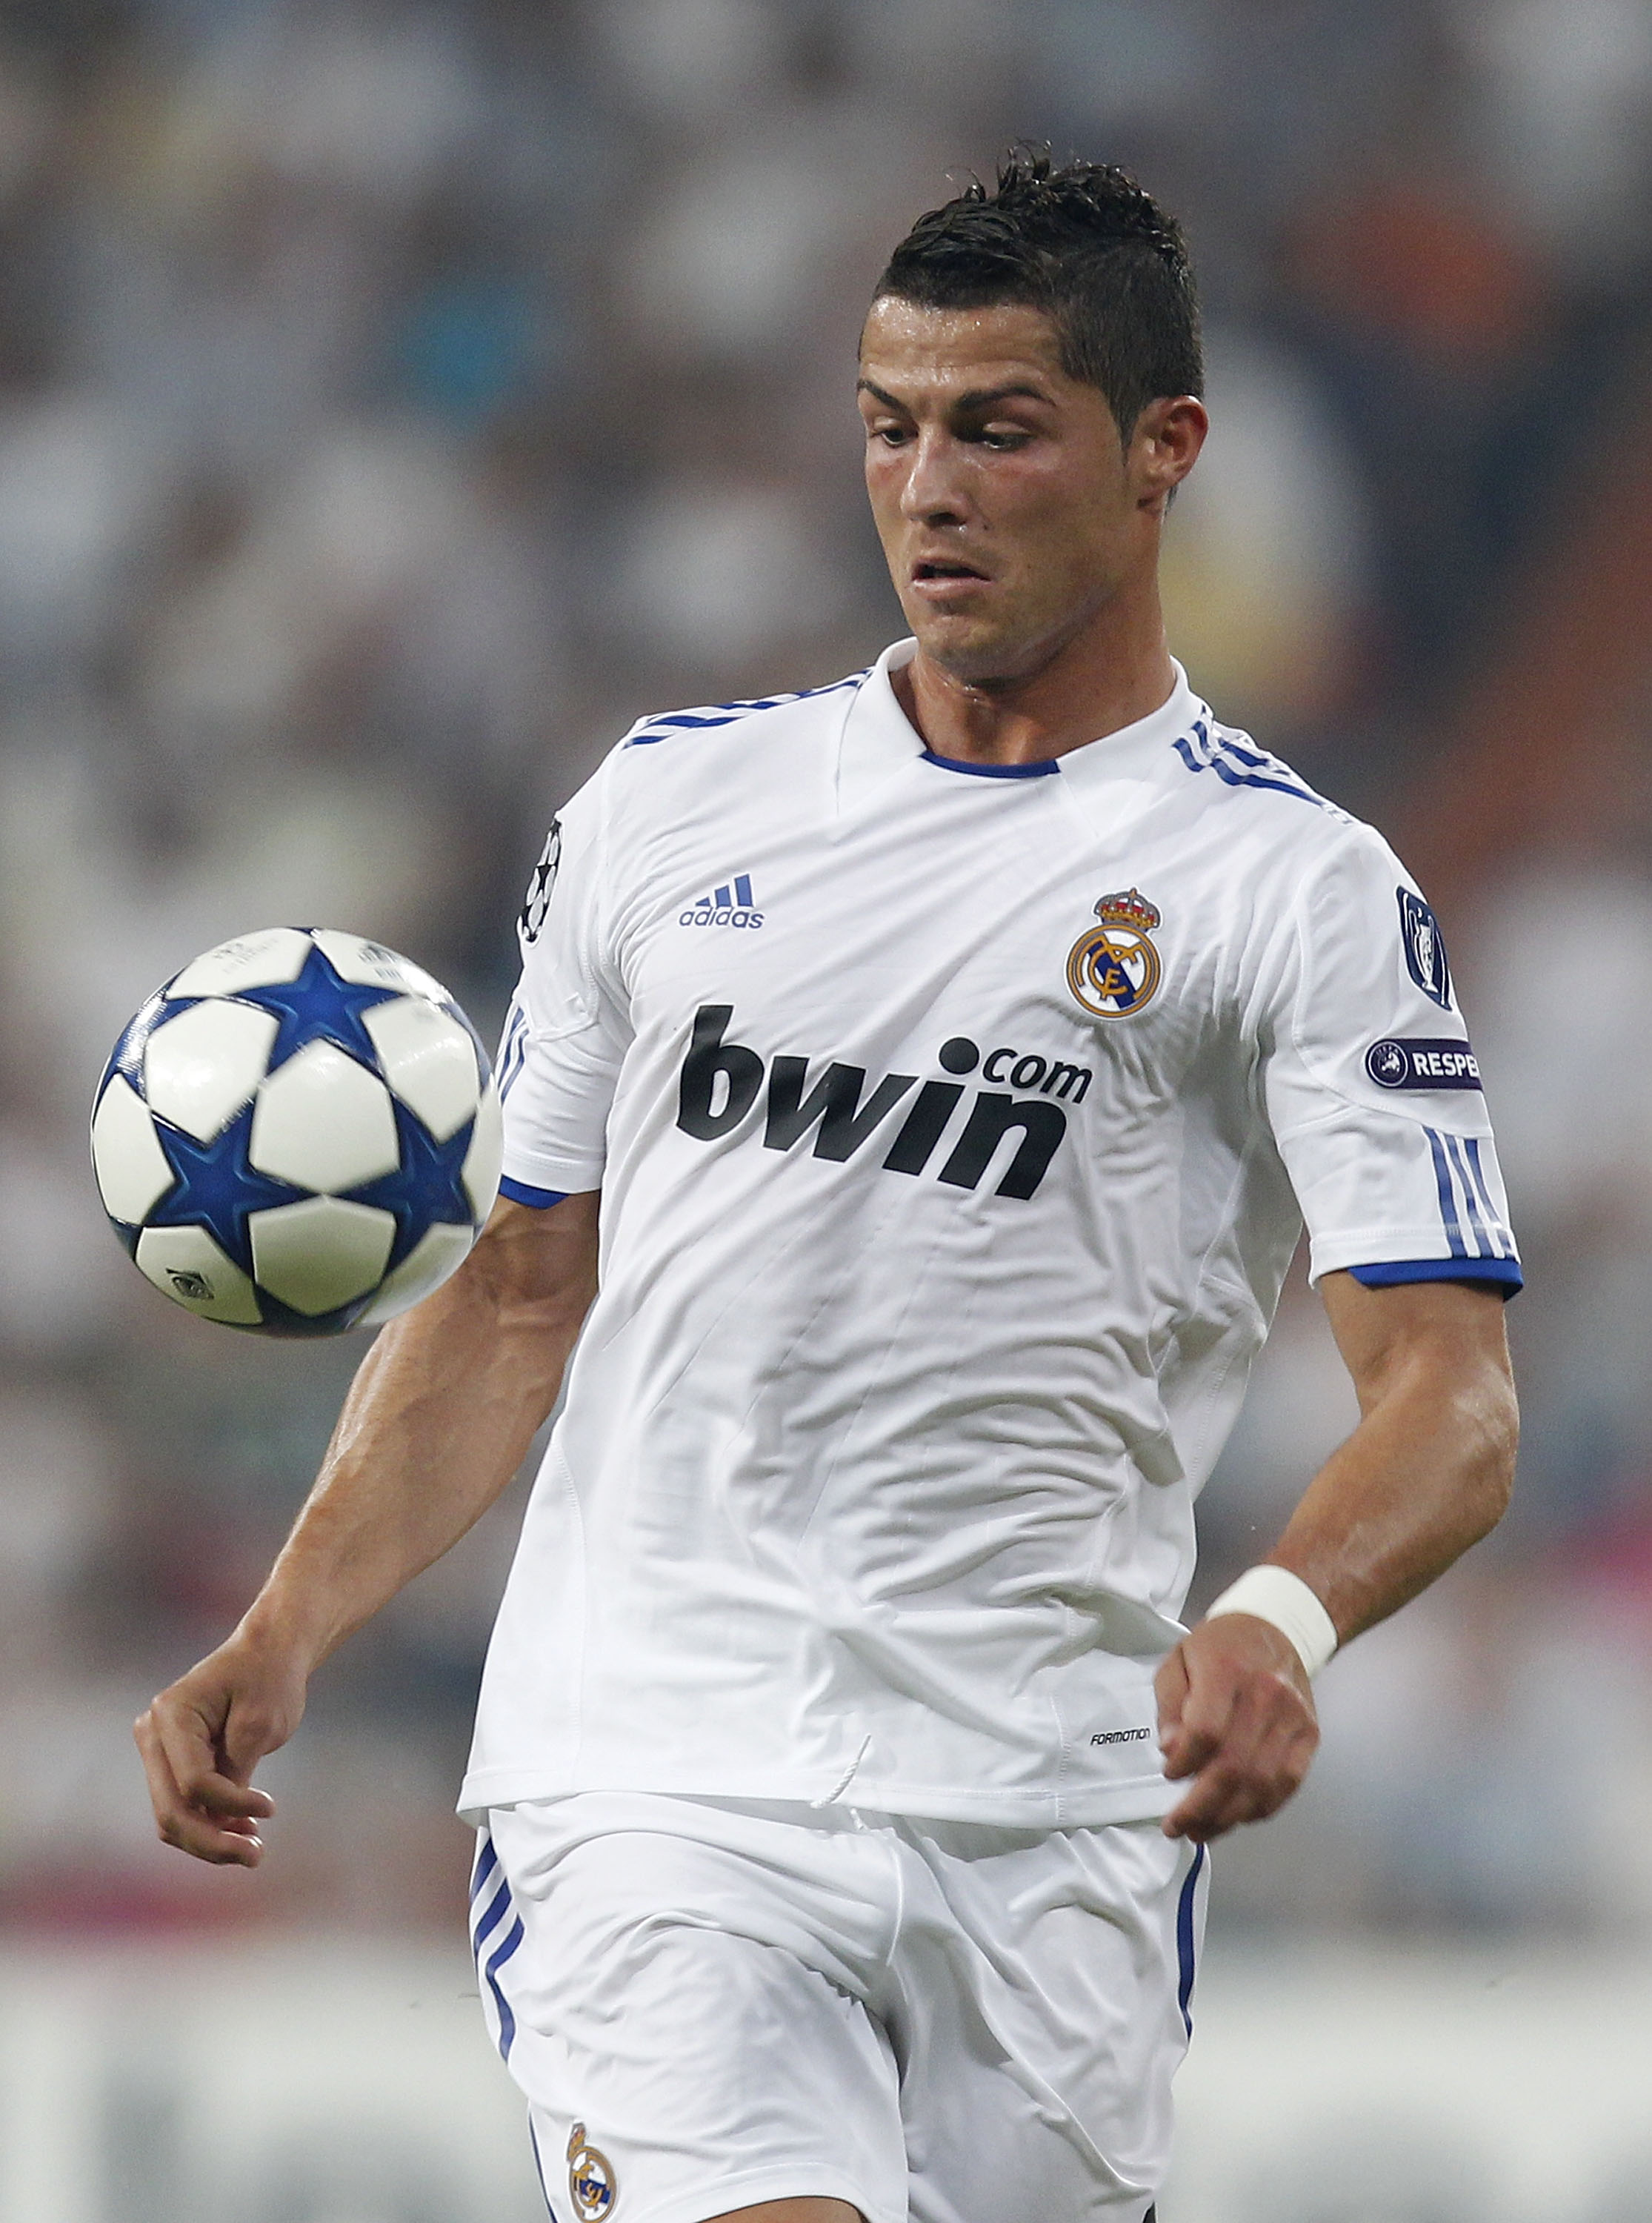 MADRID, SPAIN - SEPTEMBER 15: Cristiano Ronaldo of Real Madrid in action during the UEFA Champions League group G match between Real Madrid and AFC Ajax at Estadio Santiago Bernabeu on September 15, 2010 in Madrid, Spain. (Photo by Angel Martinez/Getty Im